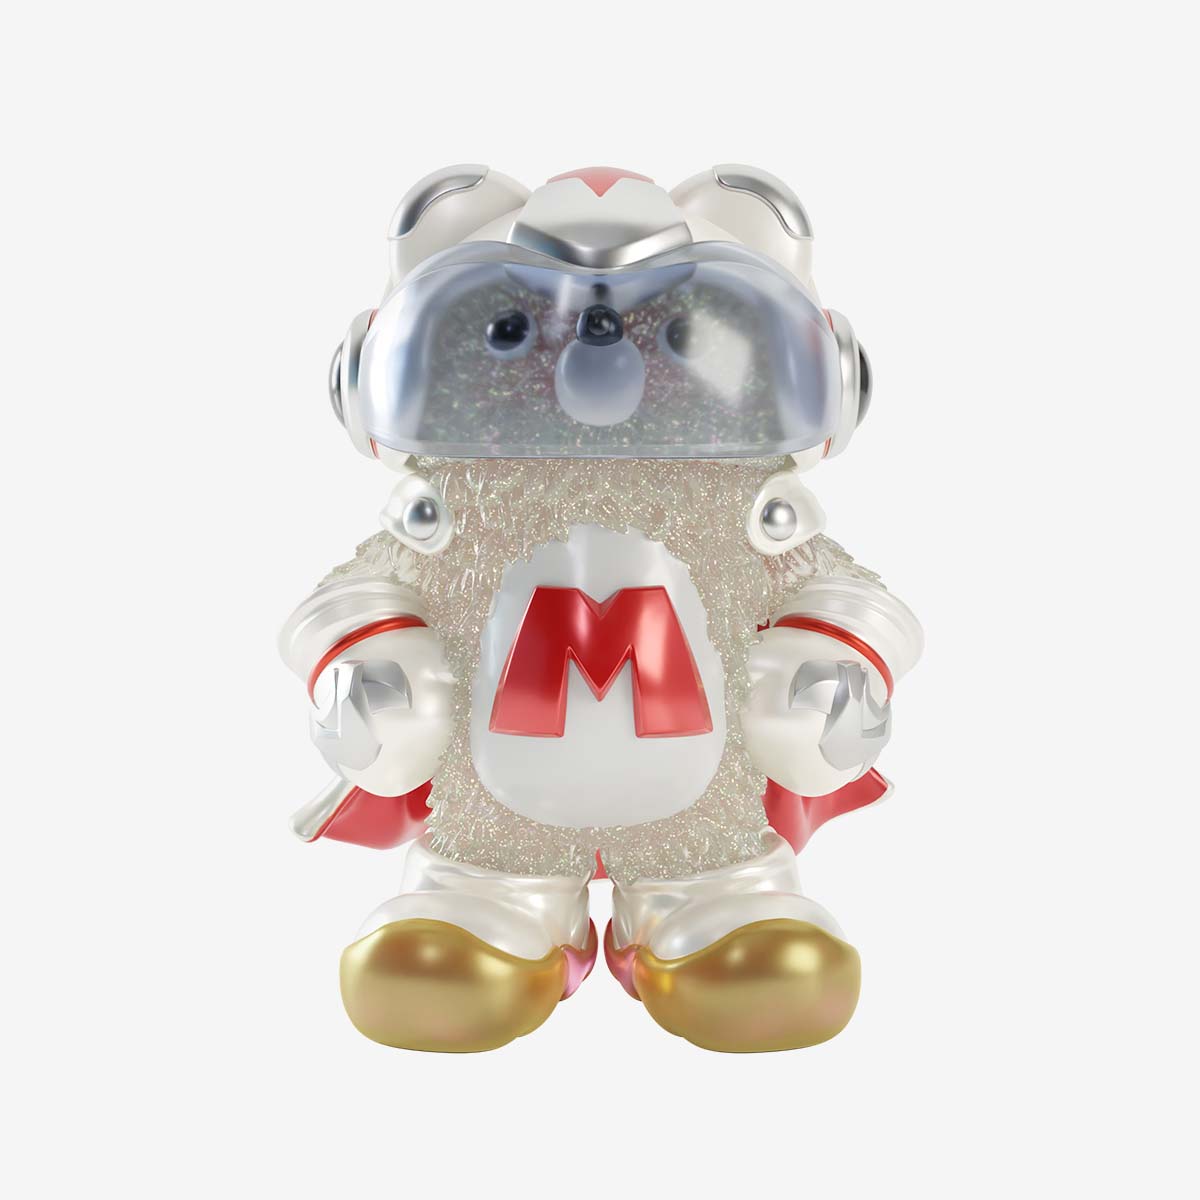 POP MART x INSTINCTOY MUCKEY Play Time Blind Box Series - The Toy Chronicle